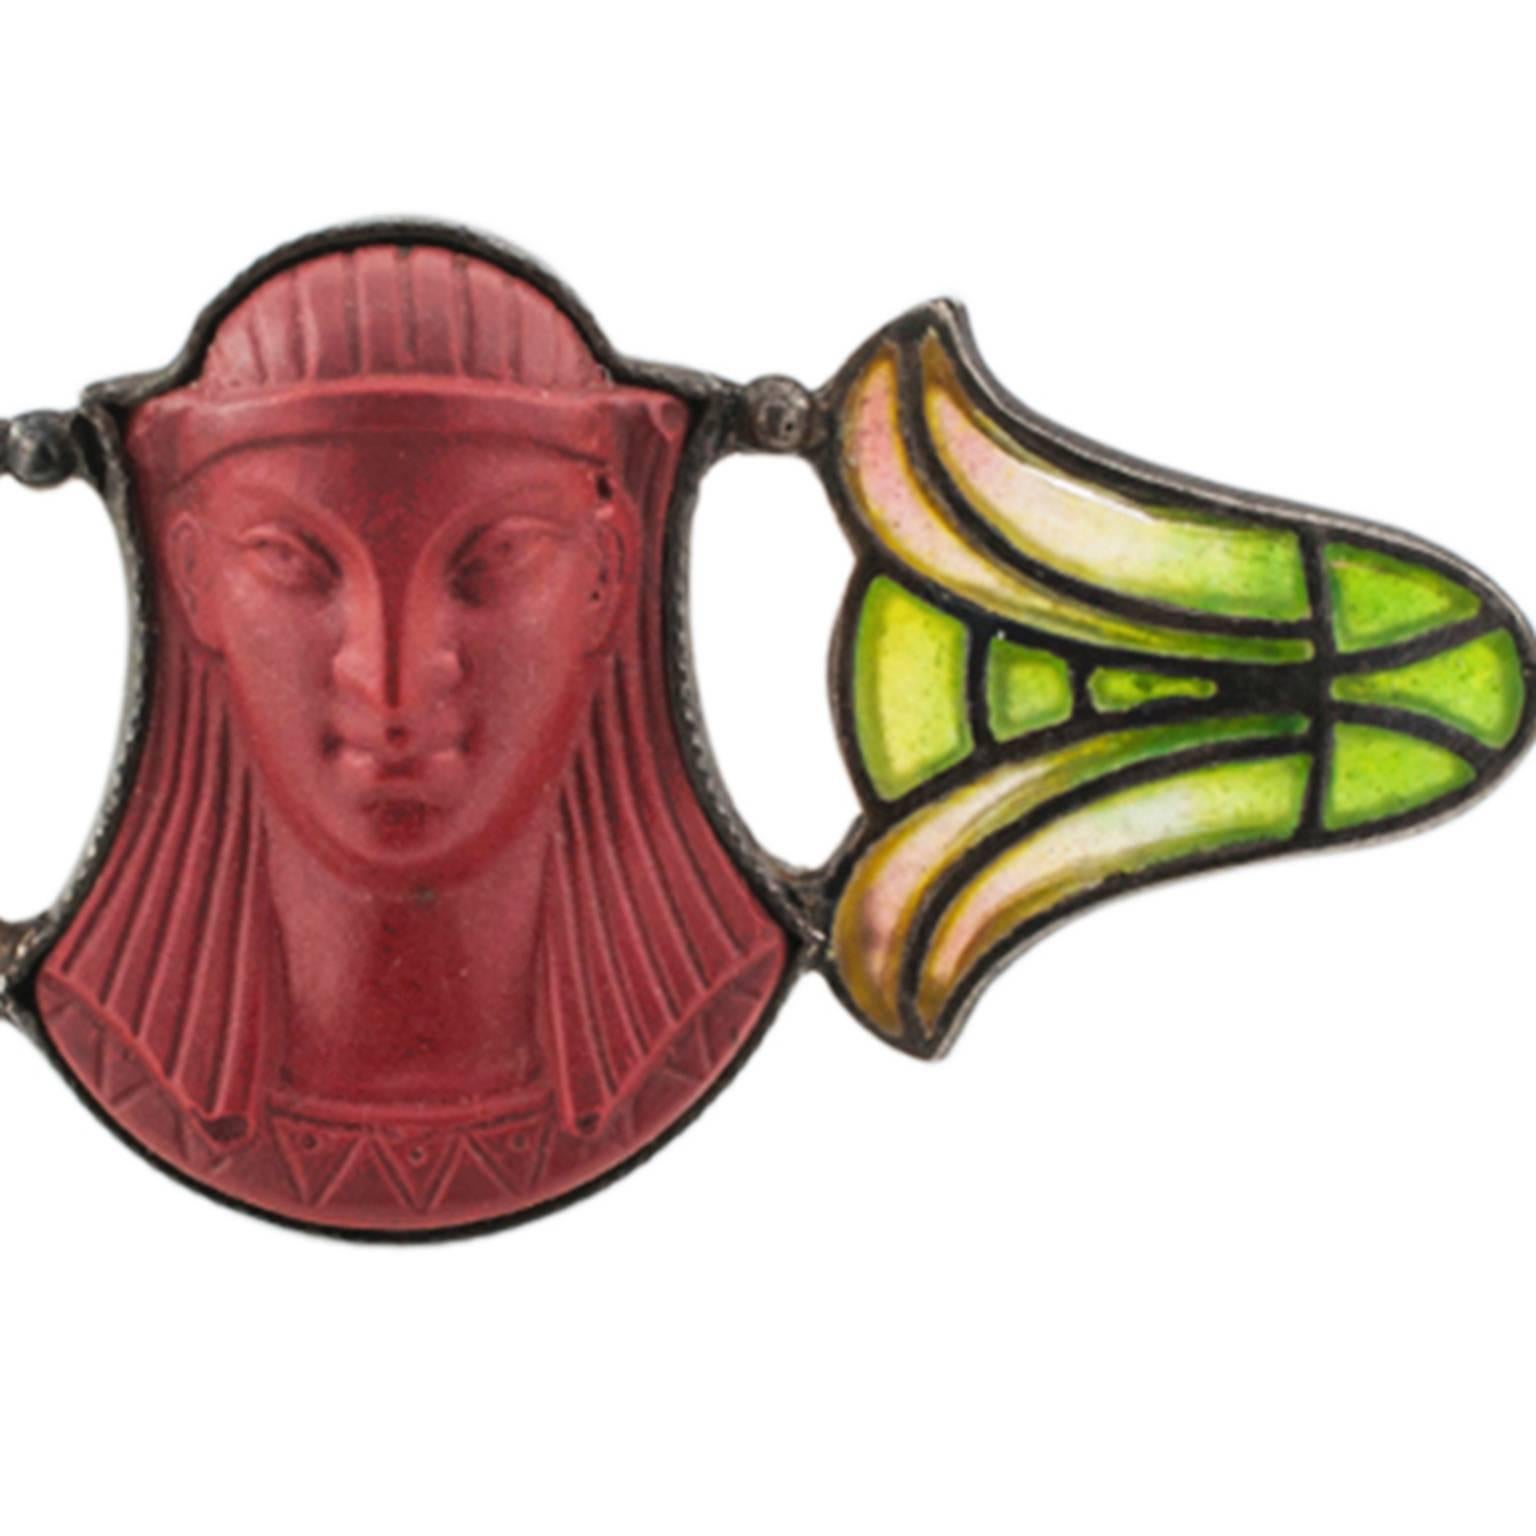 Plique a Jour Egyptian Revival Antique Brooch

Wonderfully preserved, the carved pharaonic face framed in all its majesty by the mystical glowing light of a pair of tulip flowers... The alluring magic of antique treasures comes in all shapes, all